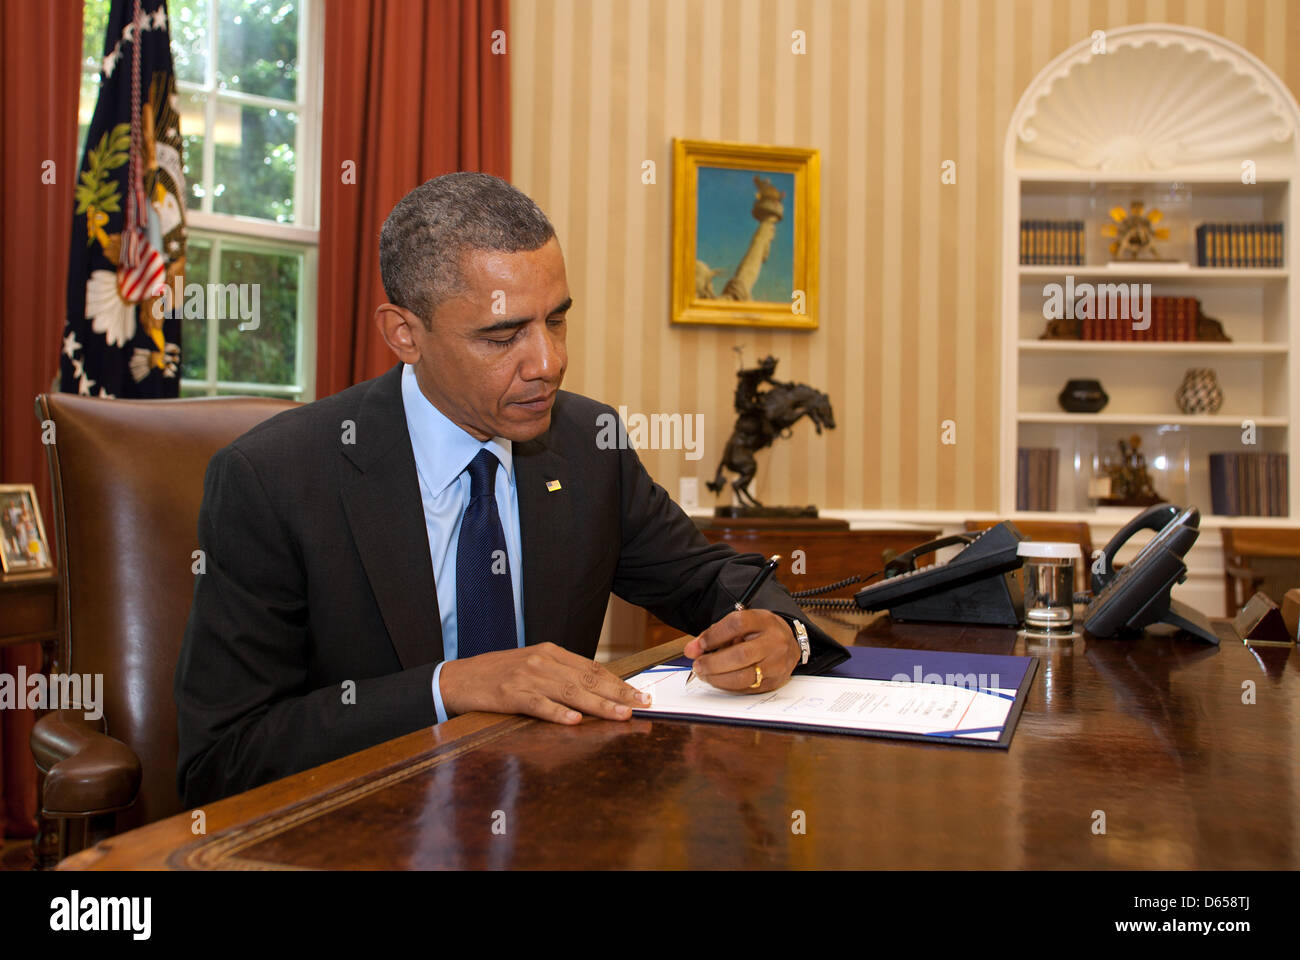 United States President Barack Obama signs S.3261, Contract Awards for Large Air Tankers, in the Oval Office of the White House, in Washington, D.C. on Wednesday, June 13, 2012. The bill will support America's ability to fight wildfires by enabling the Forest Service to accelerate the contracting of the next generation of air tankers for wildfire suppression..Credit: Martin Simon / Stock Photo